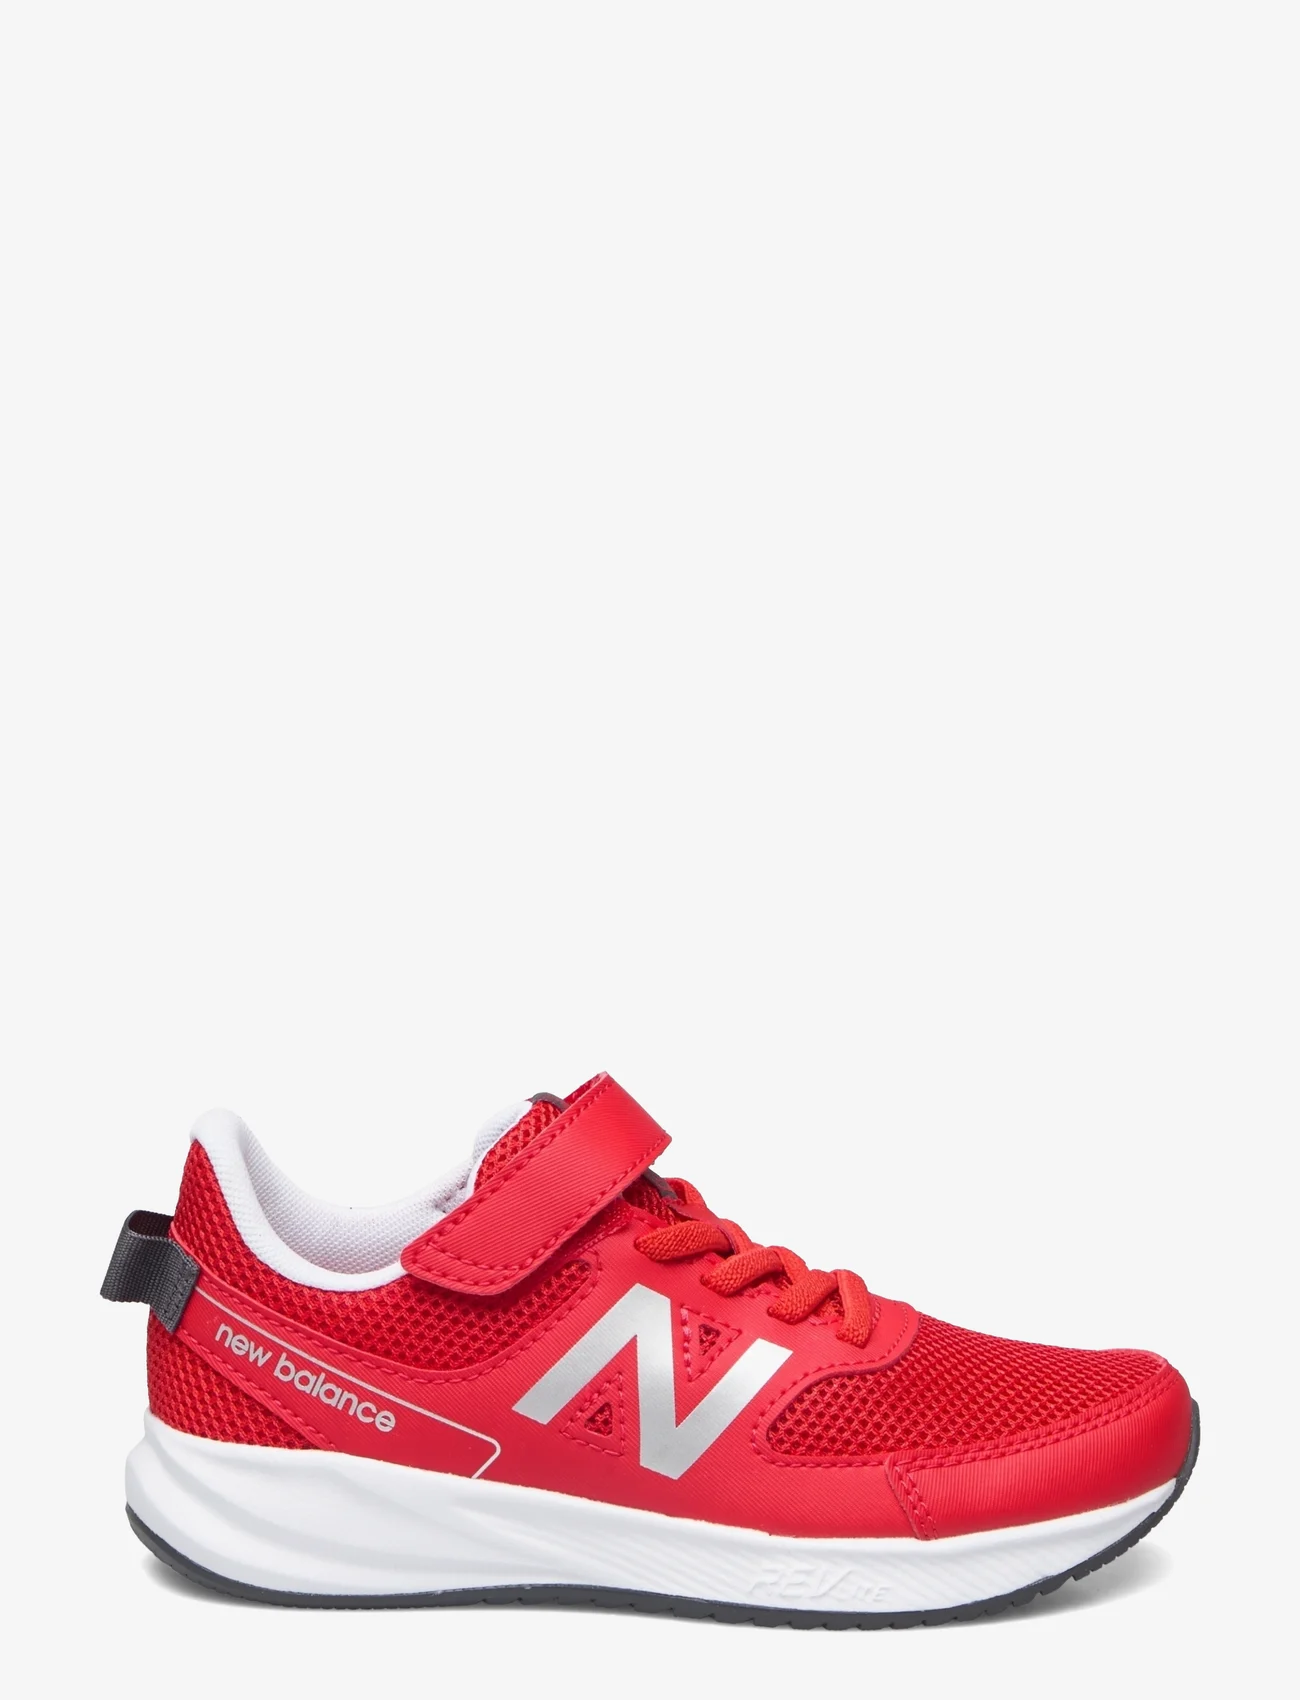 New Balance - New Balance 570 v3 Kids Bungee Lace with Hook & Loop Top Strap - kids - true red - 1